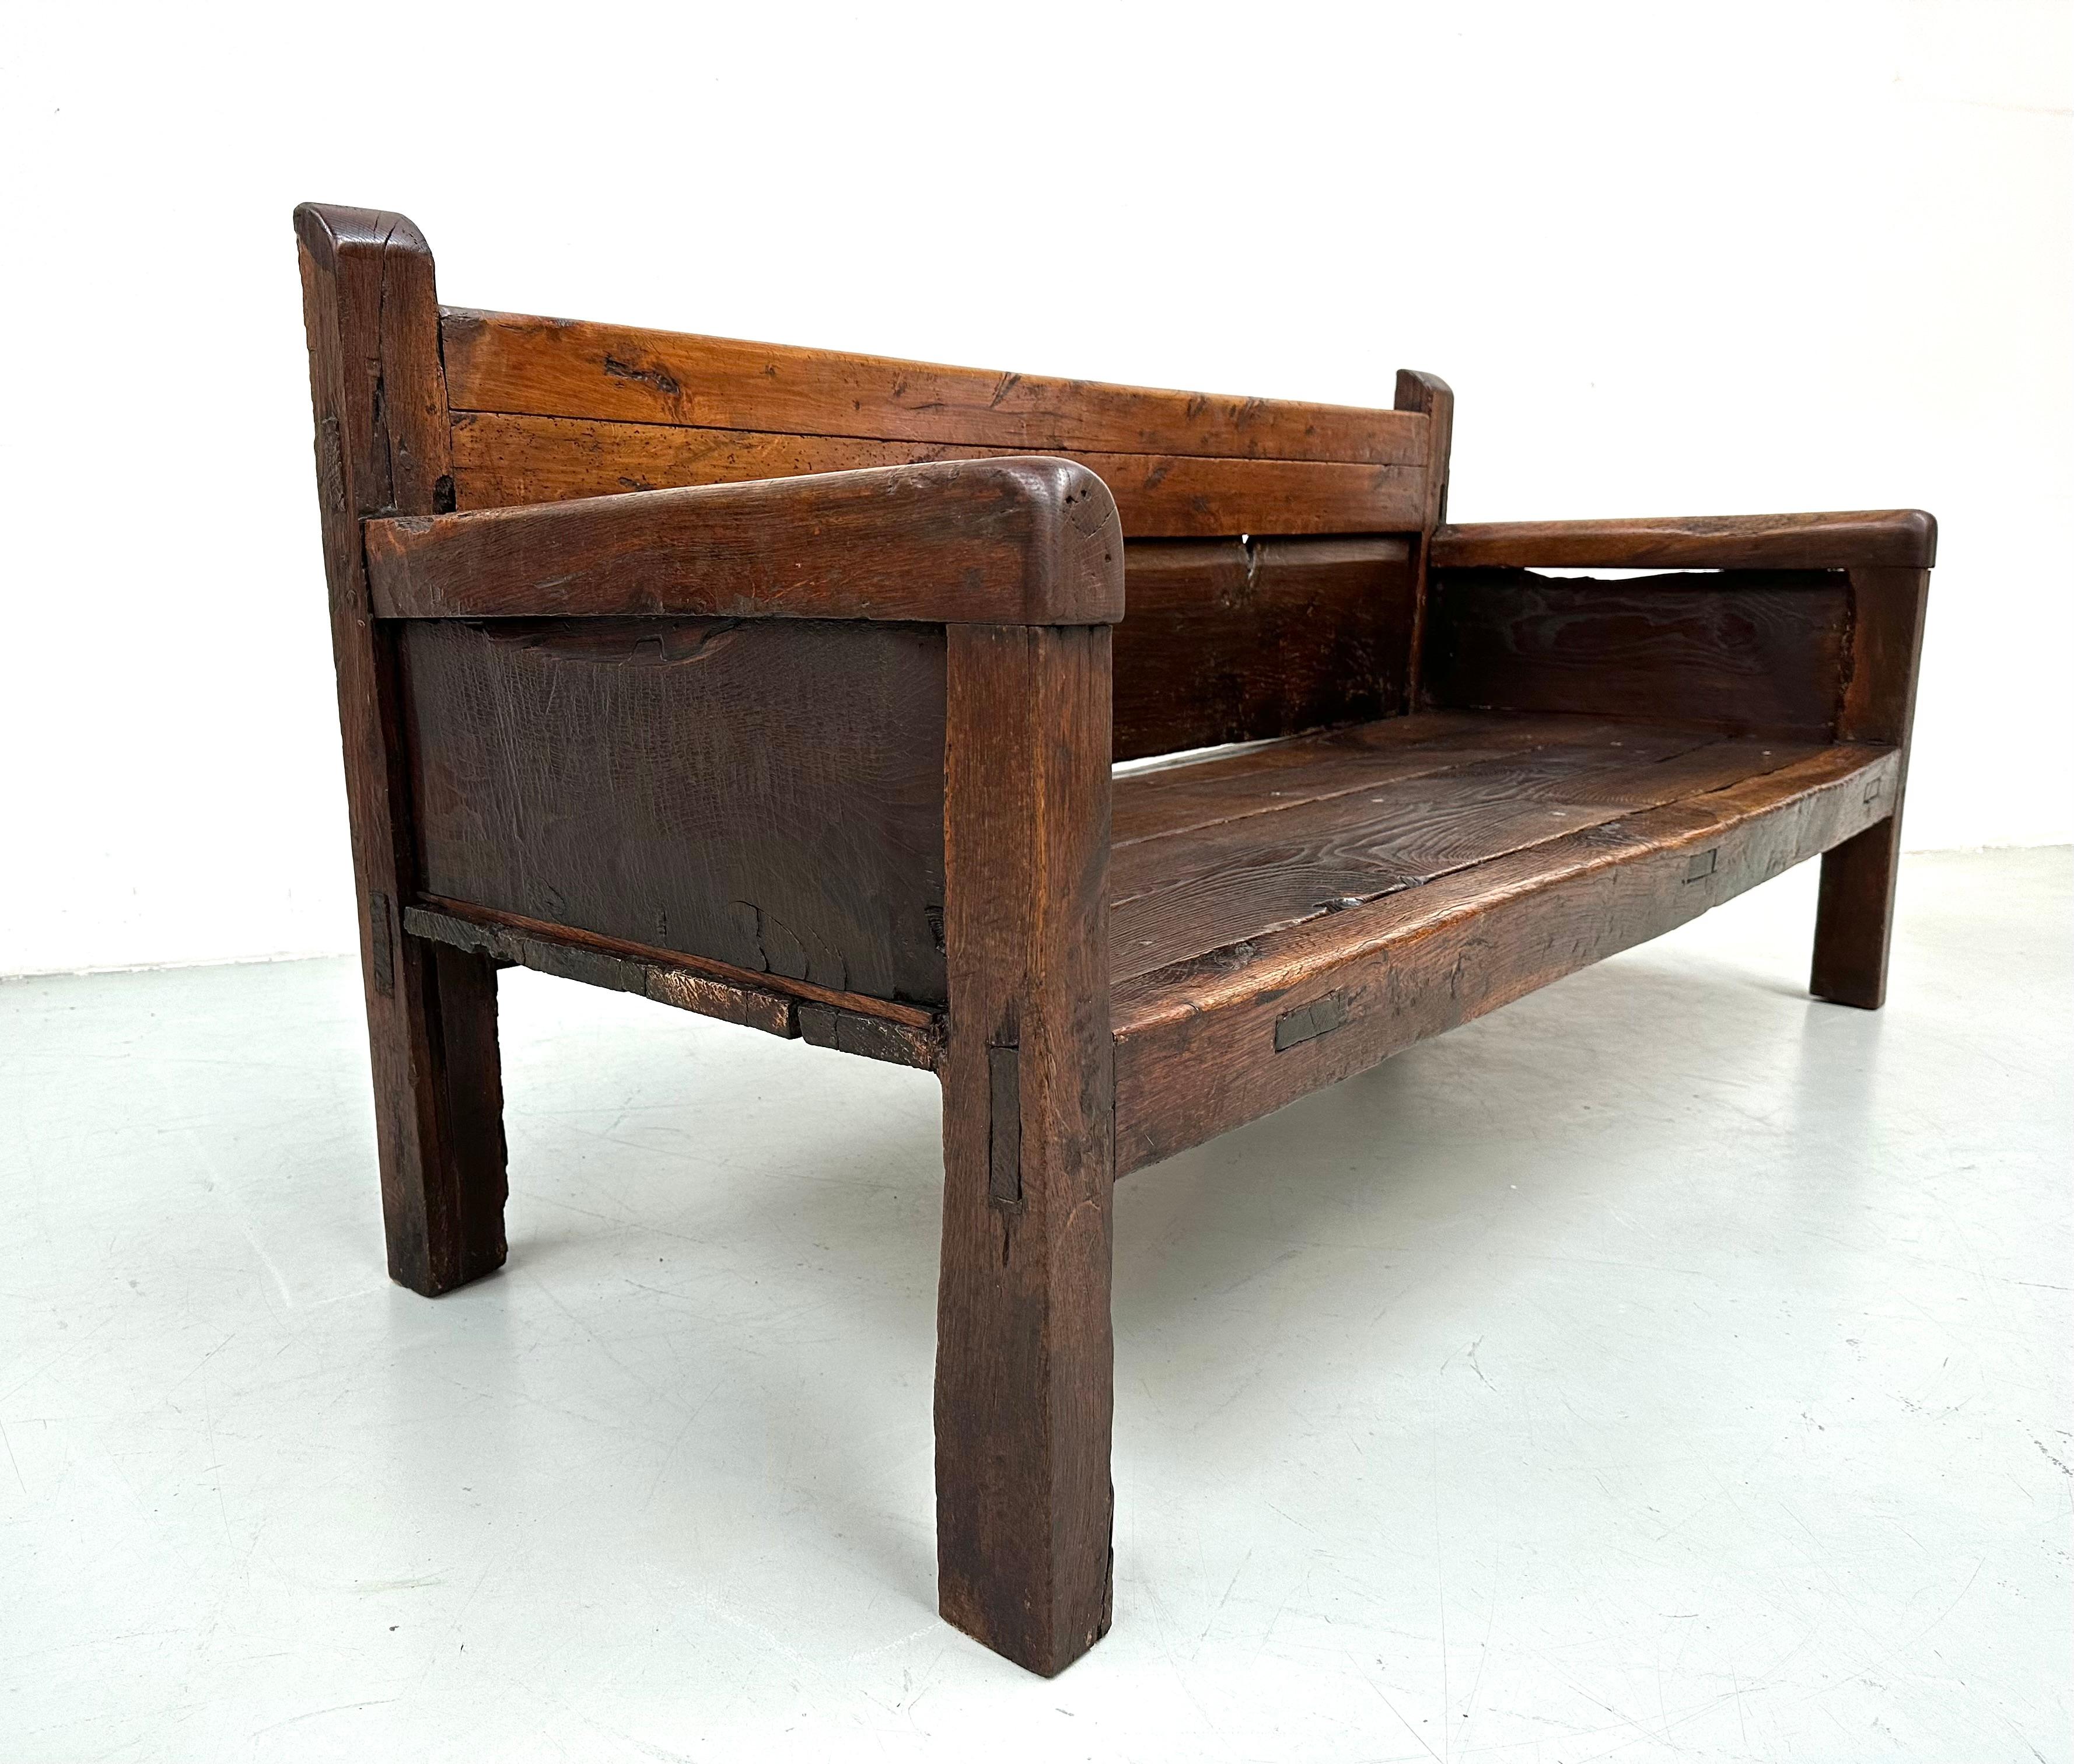 Antique Handmade Minimalistic Spanish Chestnut Wood Bench, Early 19th Century For Sale 1